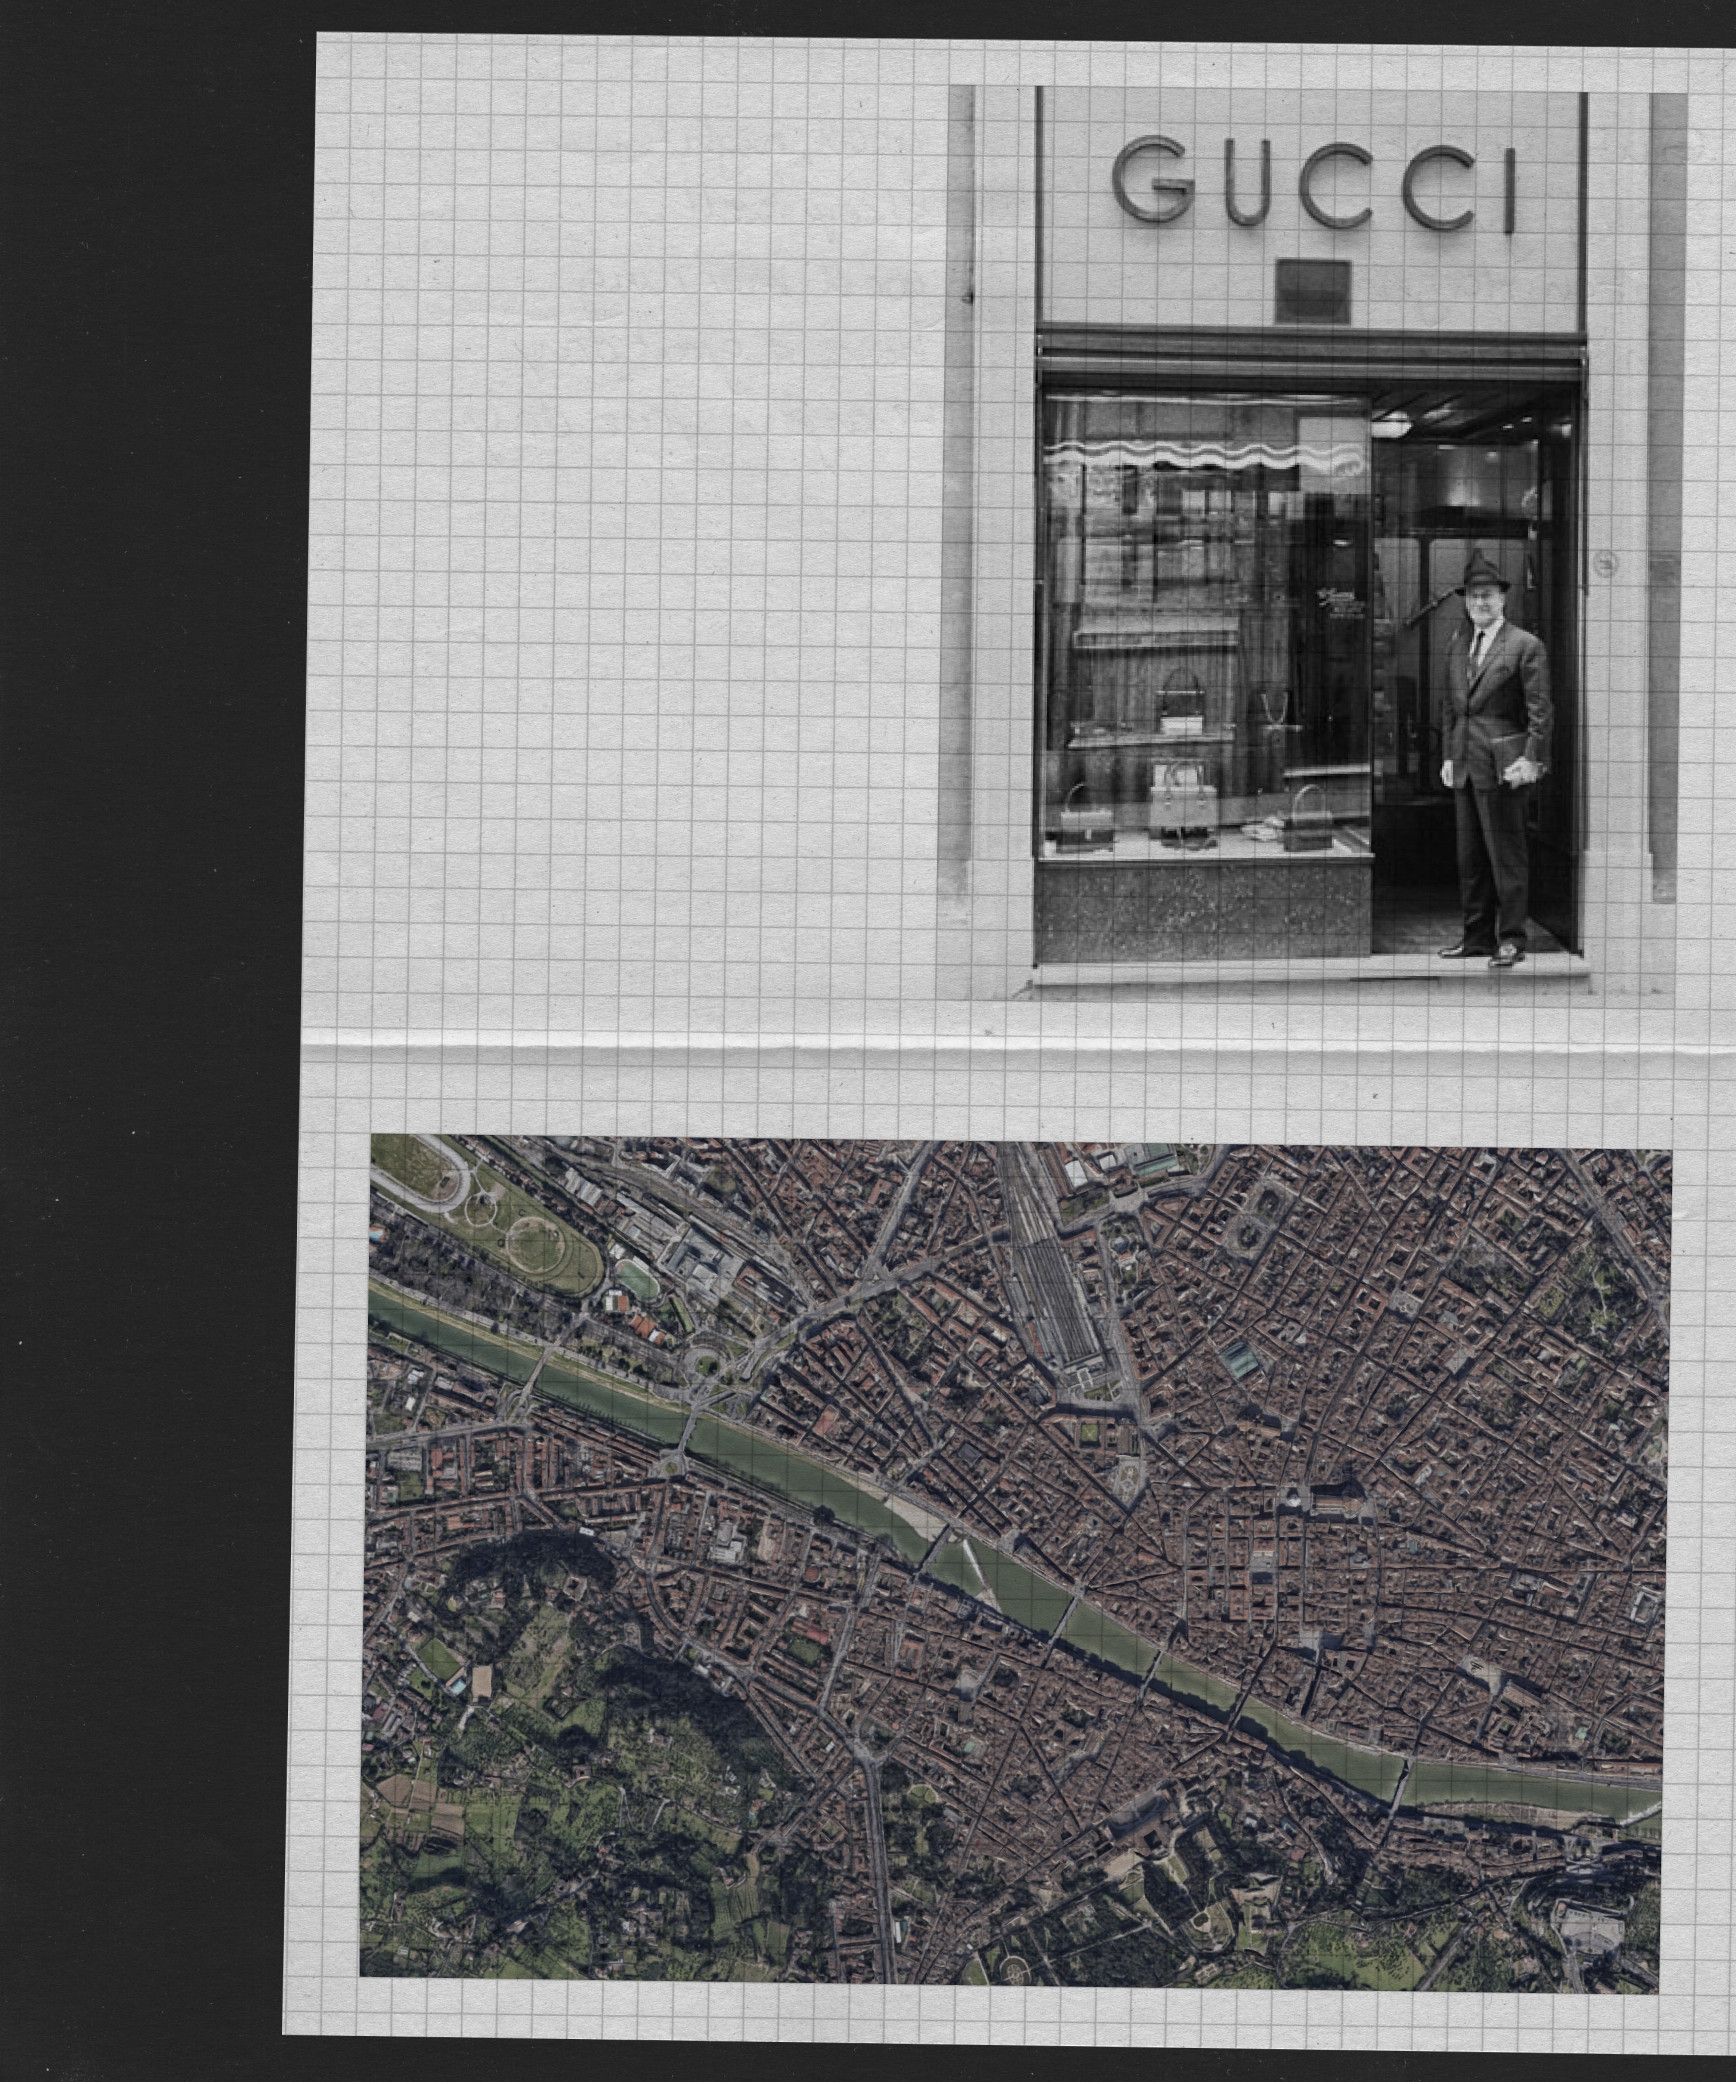 The History of Gucci - GLAM OBSERVER